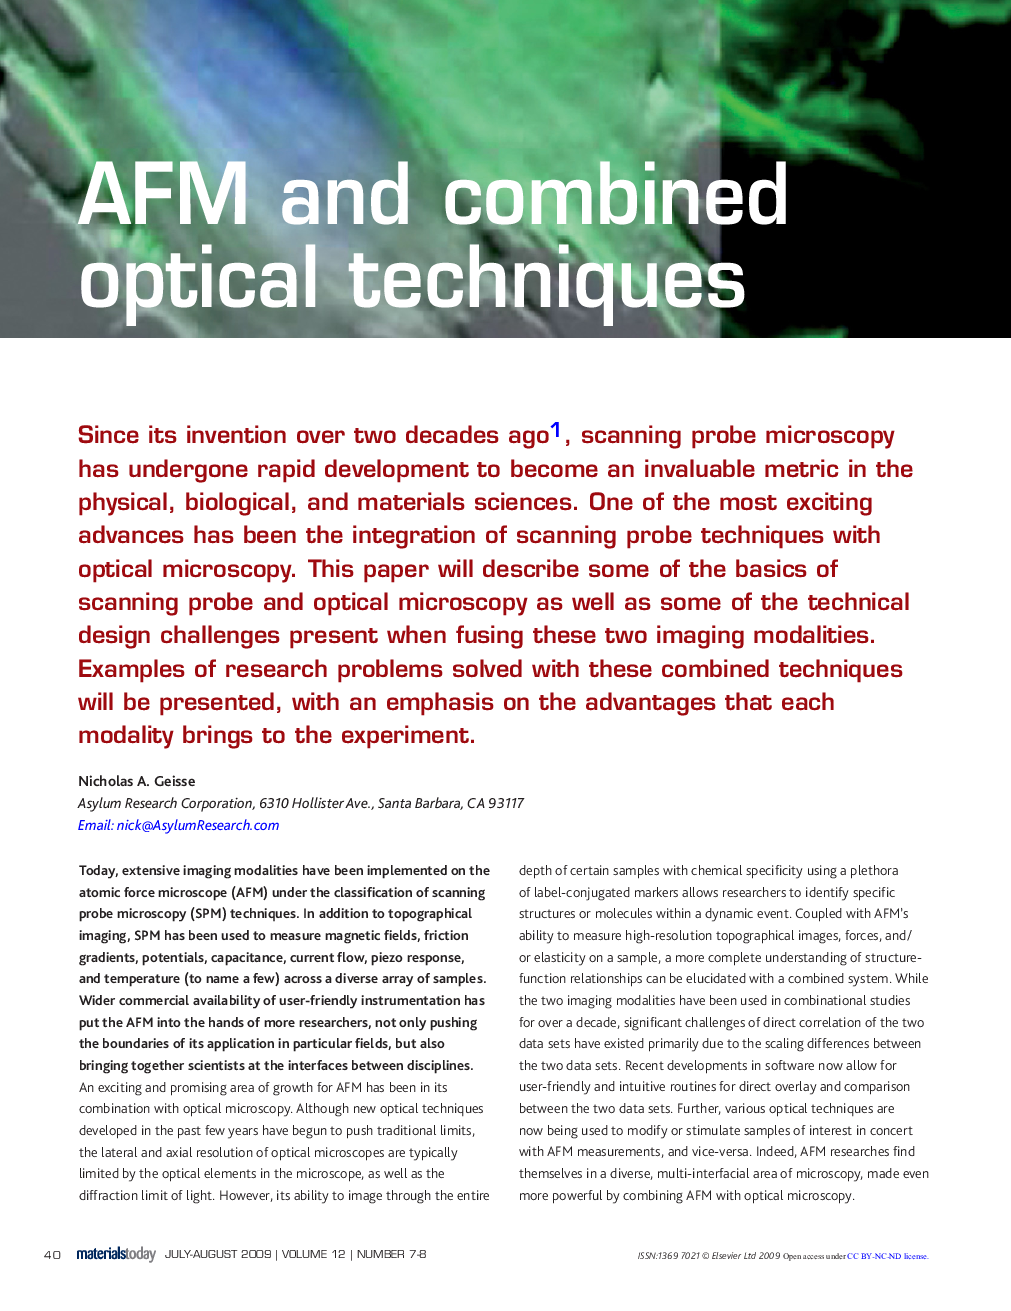 AFM and combined optical techniques